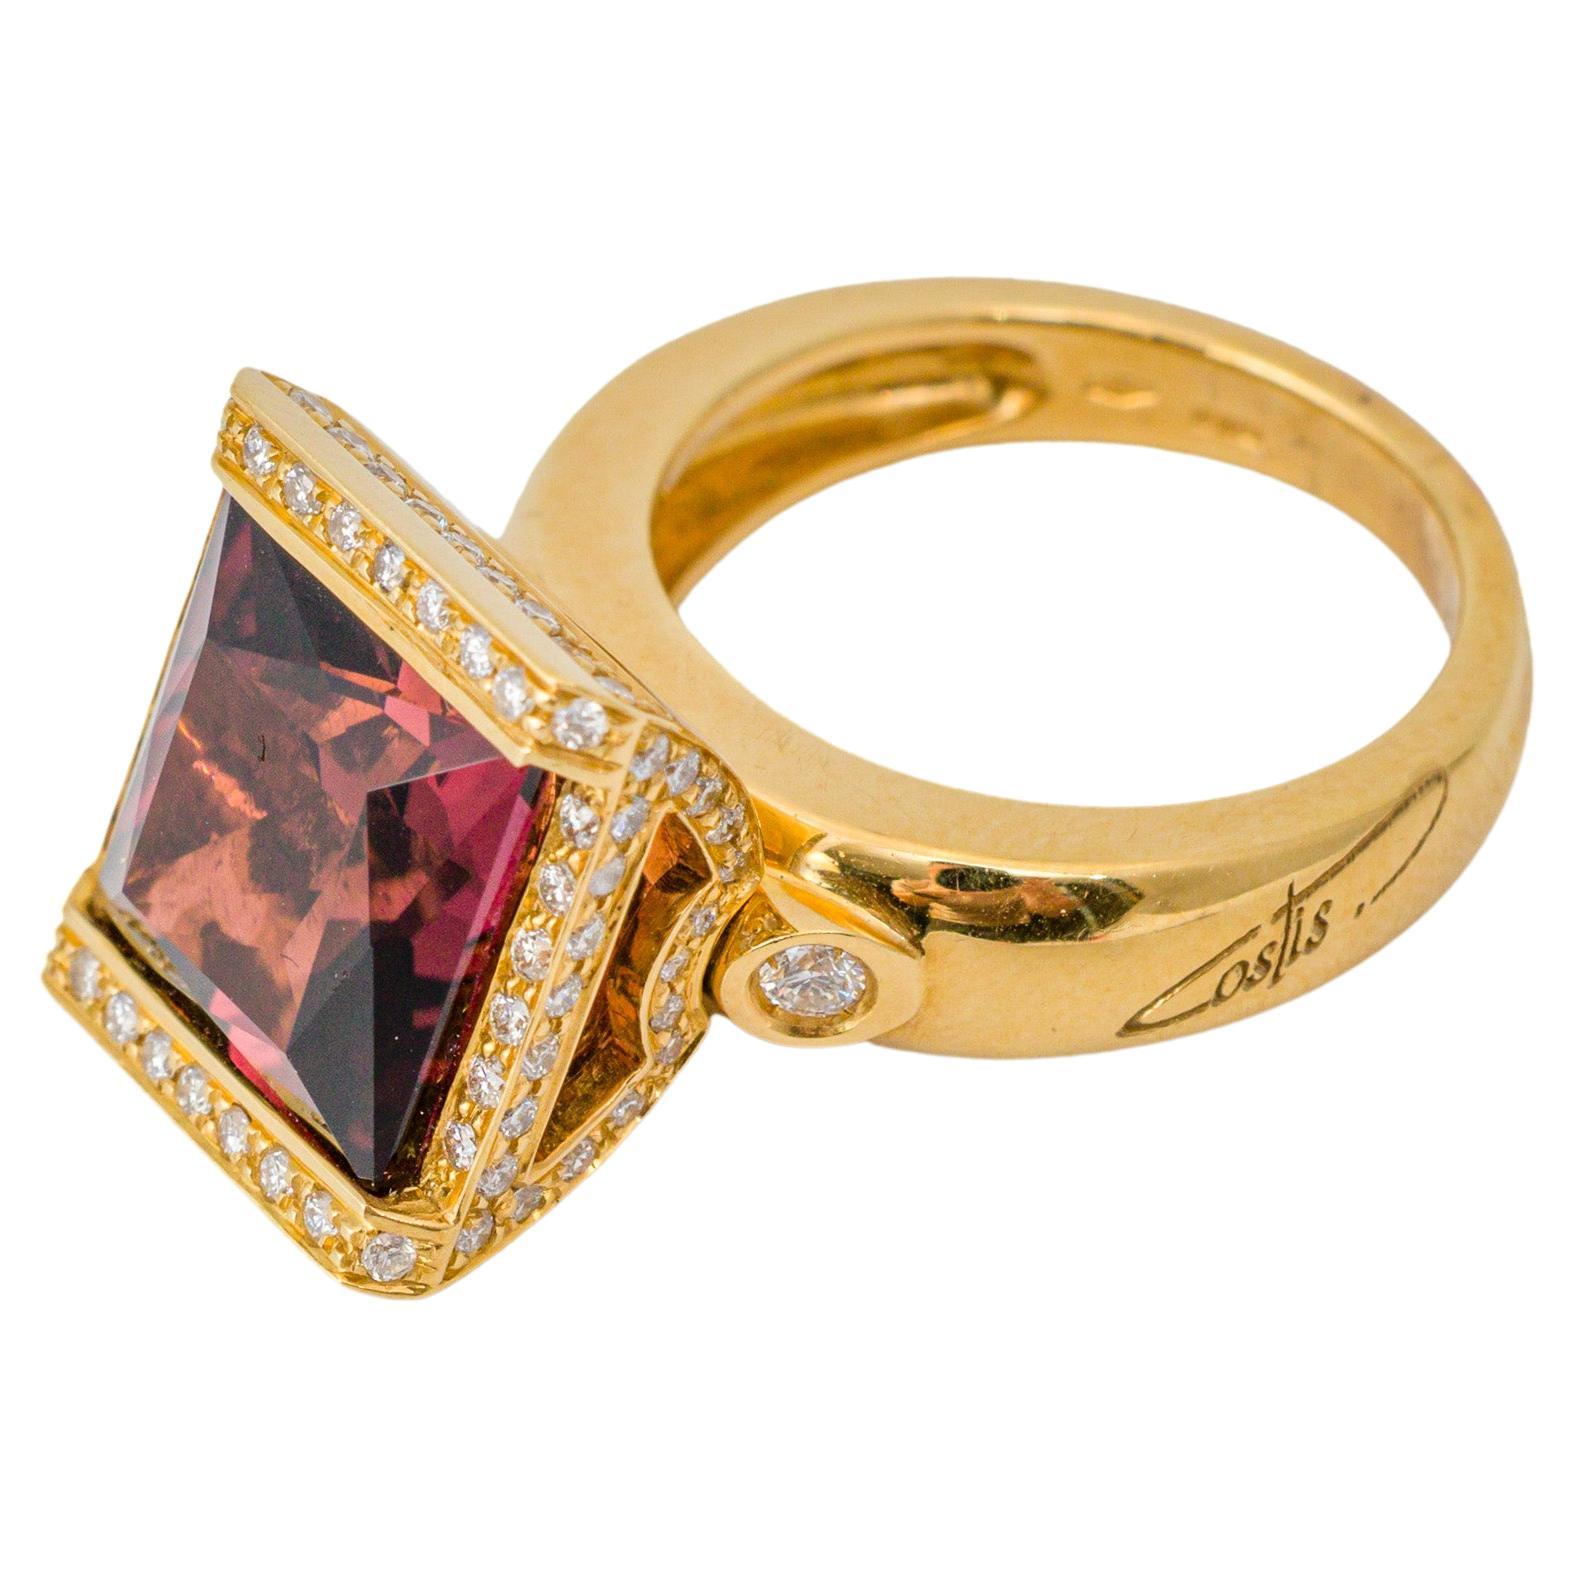 "Costis" Square In Motion Ring with 8.36 carats Pink Tourmaline and Diamonds